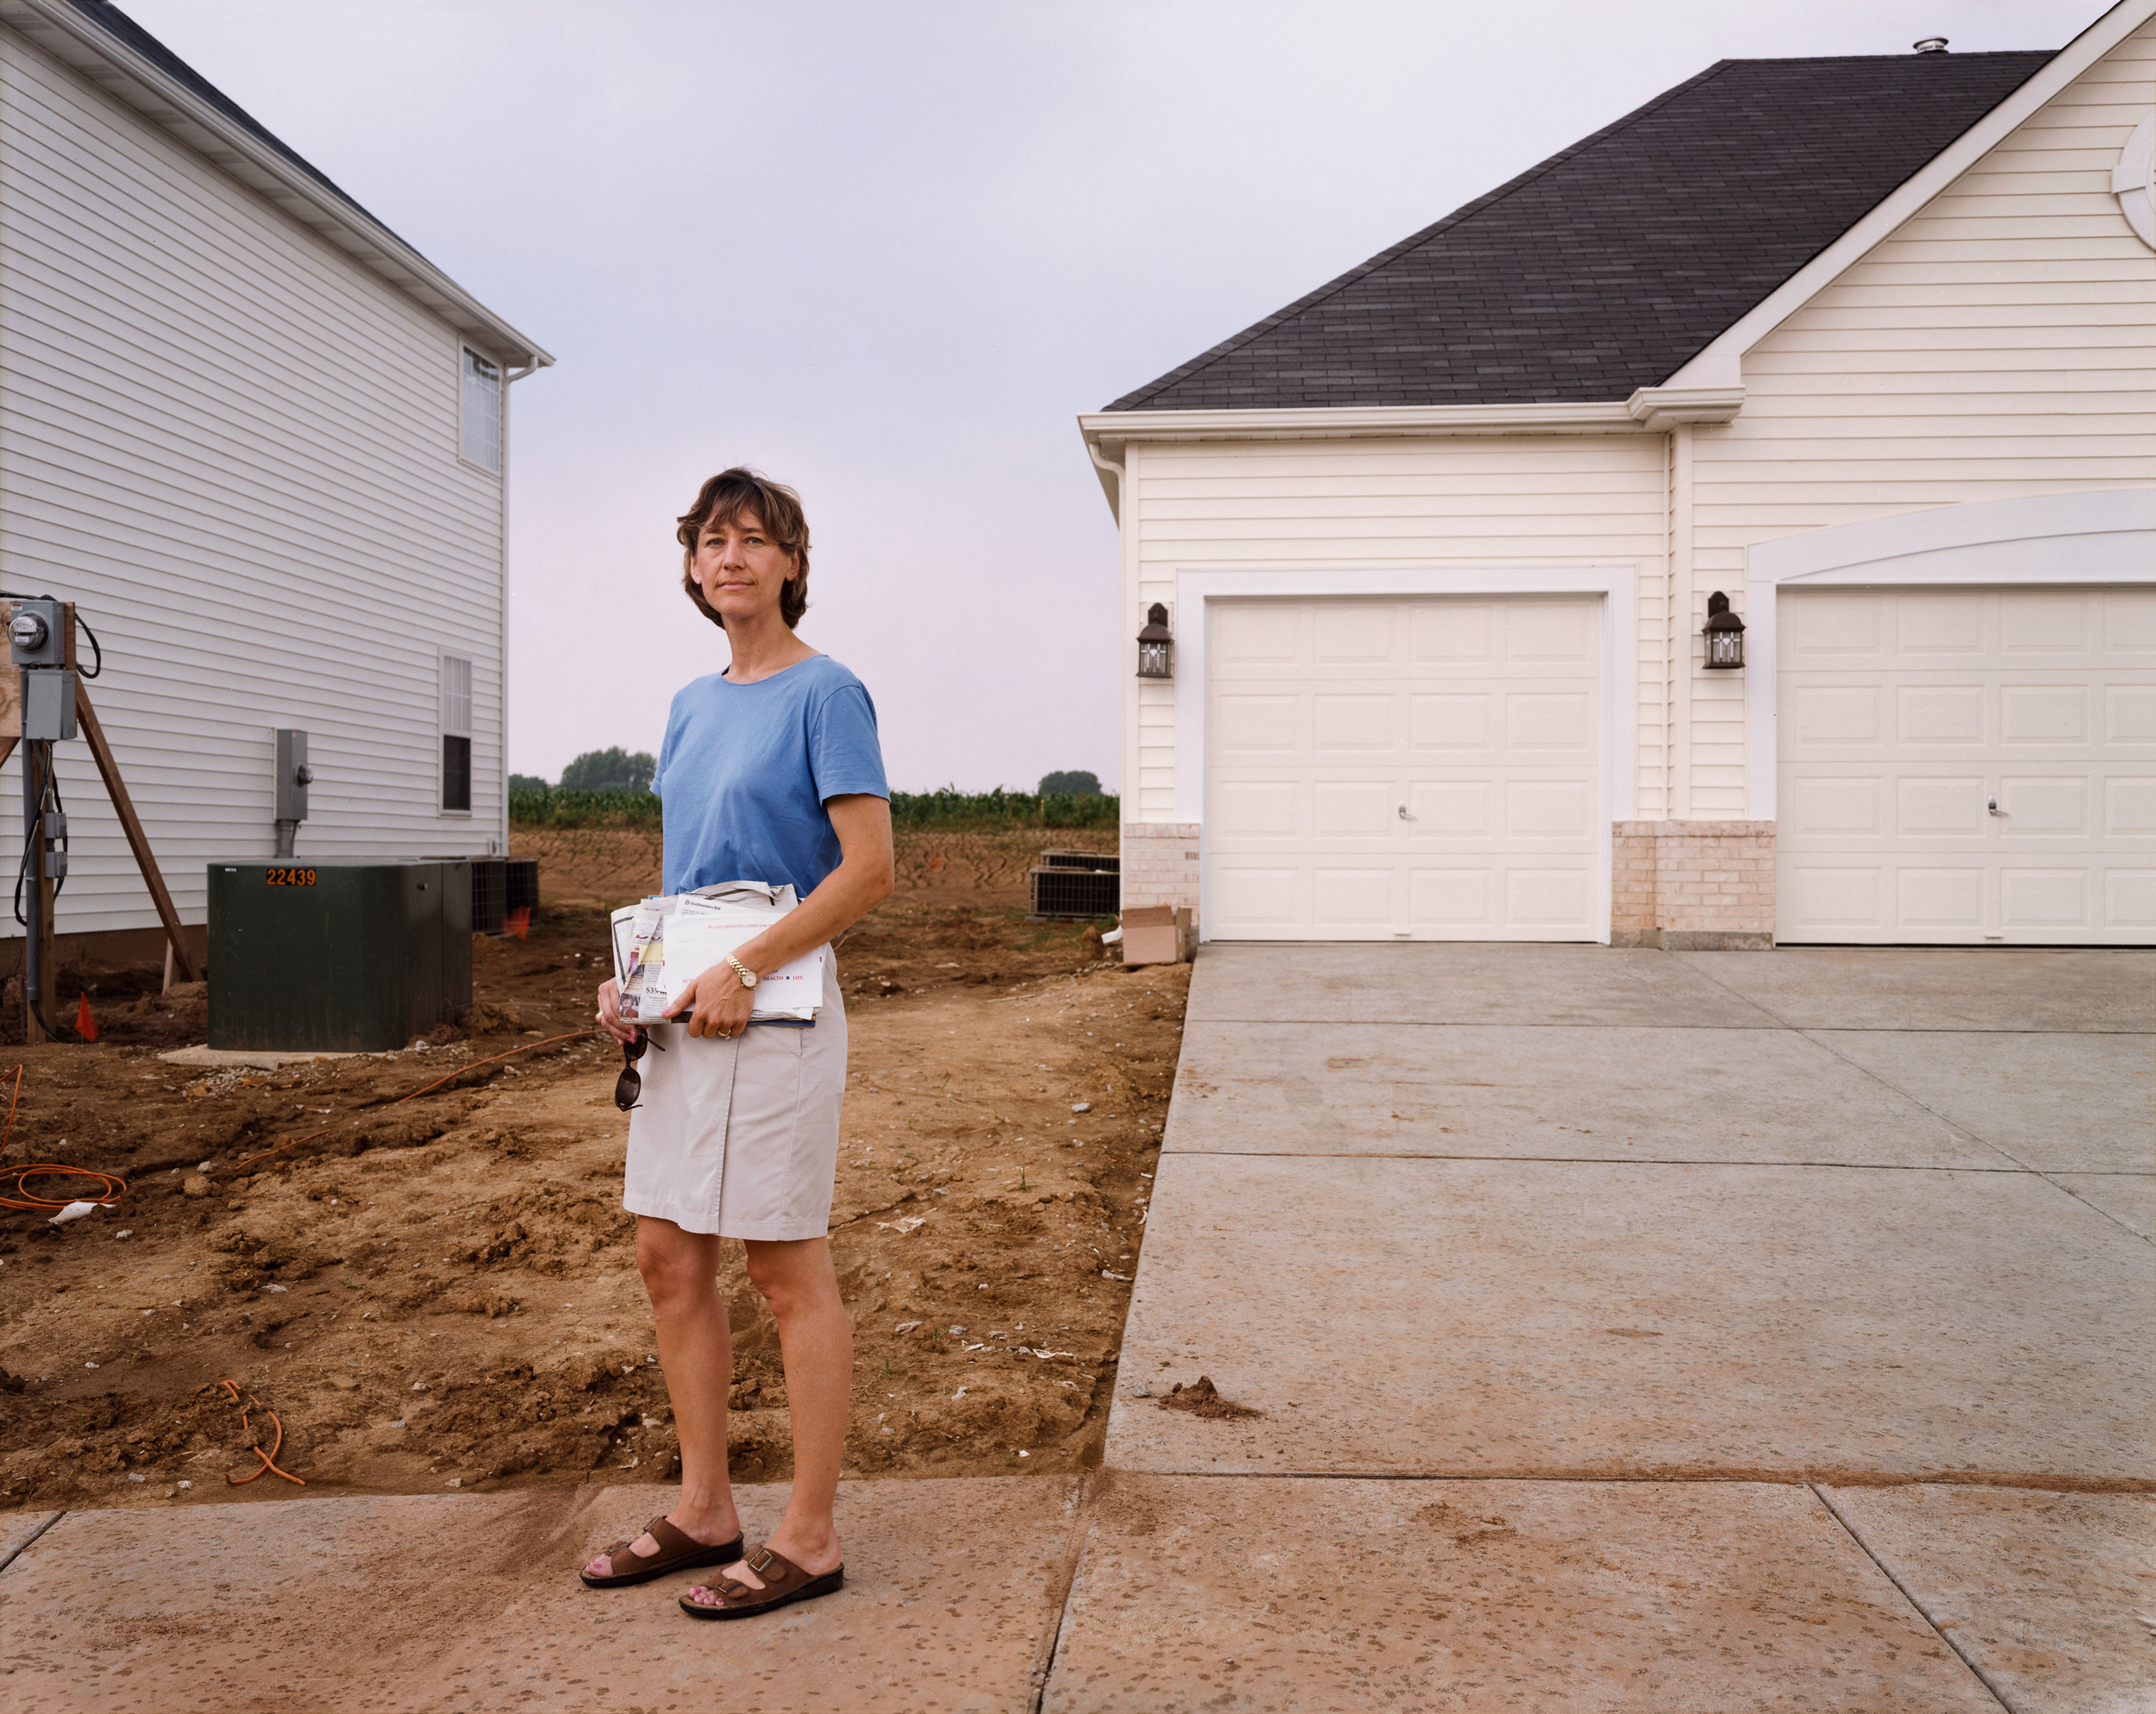 A Woman with Mail, Chesterfield, Missouri, June 1999